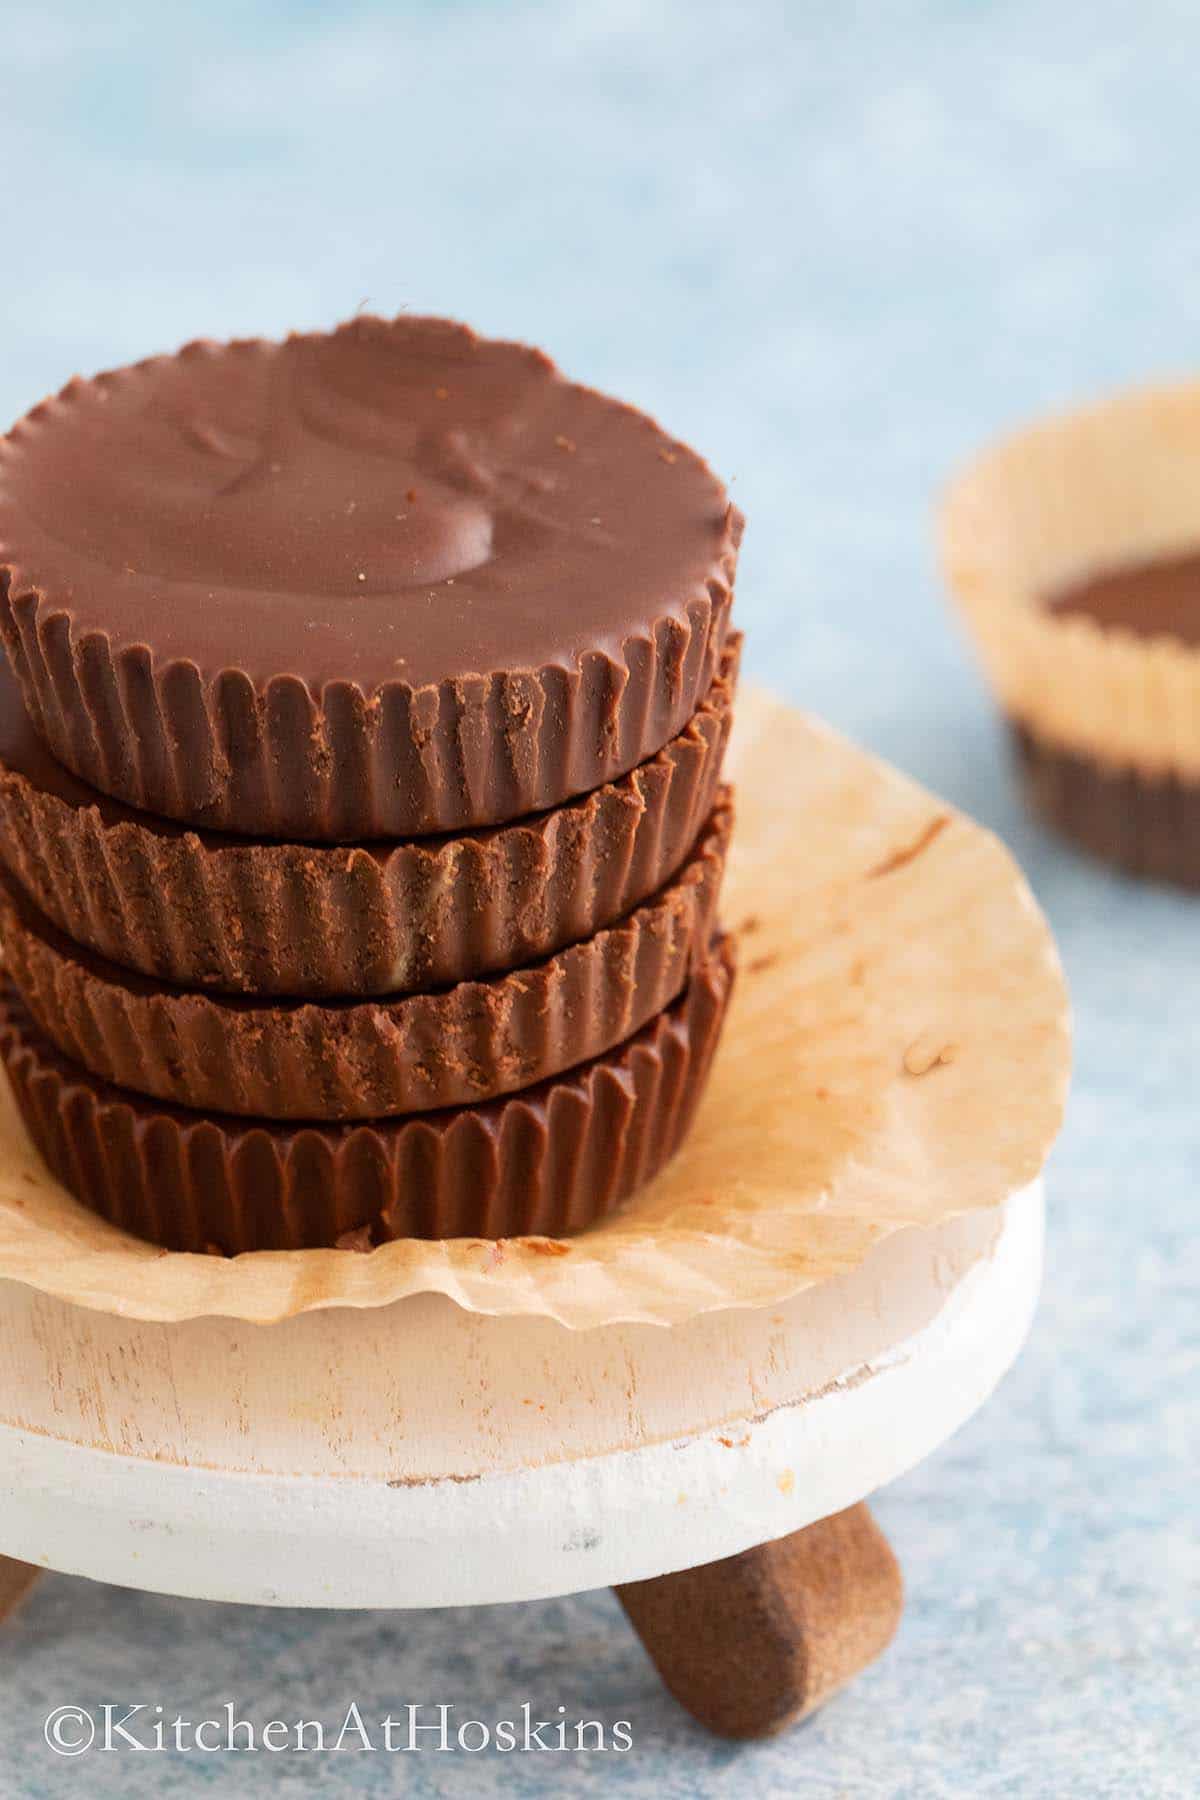 4 stacked chocolate cups on a small cake stand. 